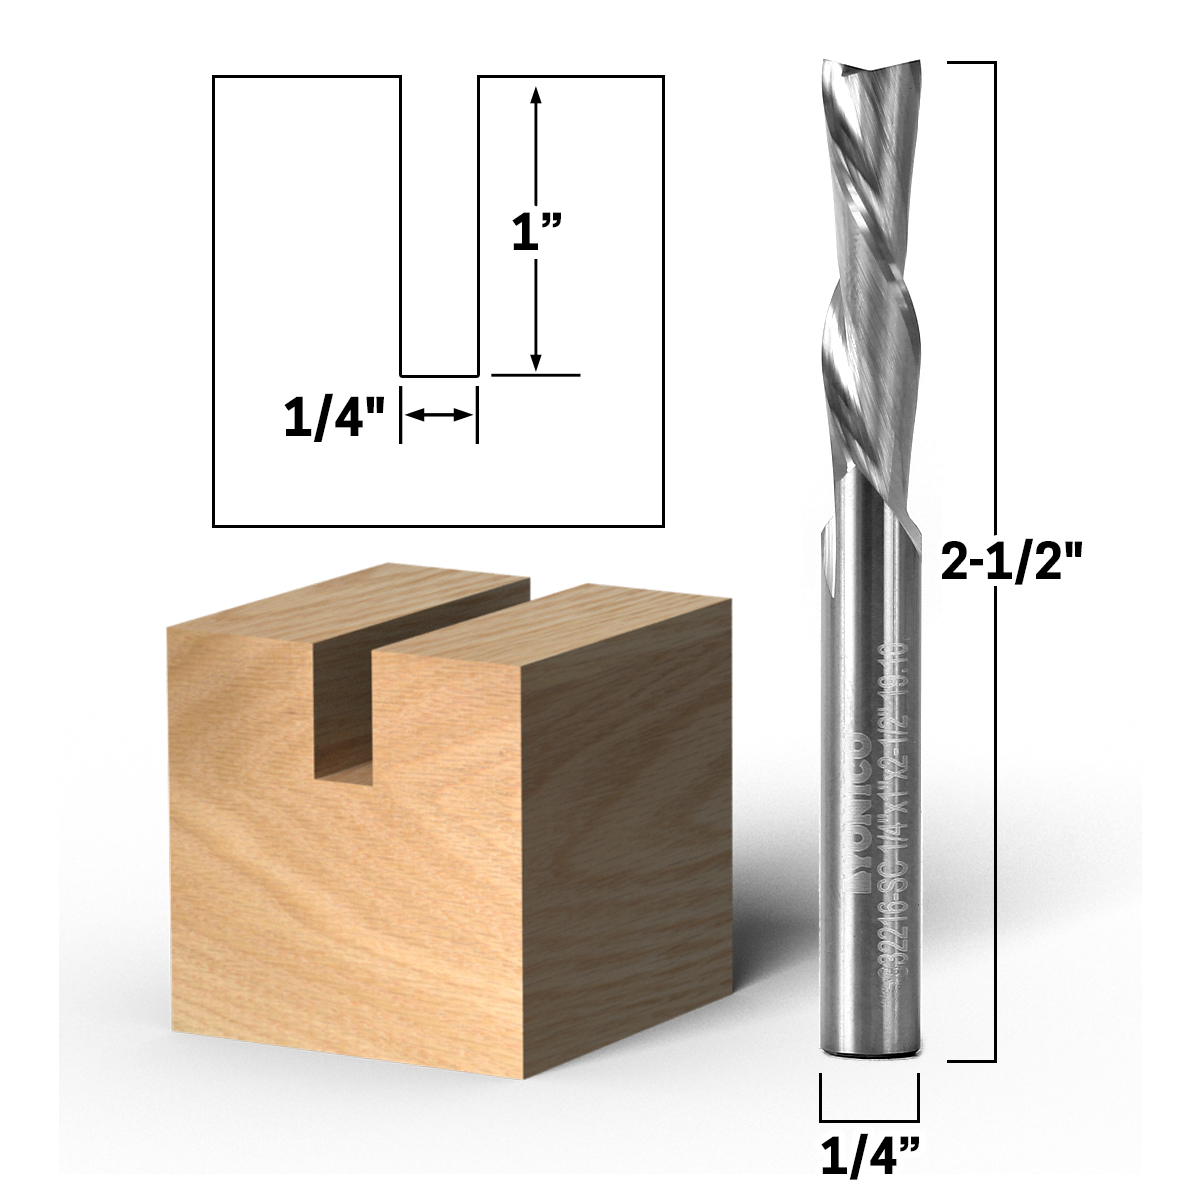 1/2 drill hole id:677 8c aa 7e8 New Lon0167 1-1/8 Dia Featured by 30mm Depth reliable efficacy Double Flute Straight Router Bit CNC Cutter 